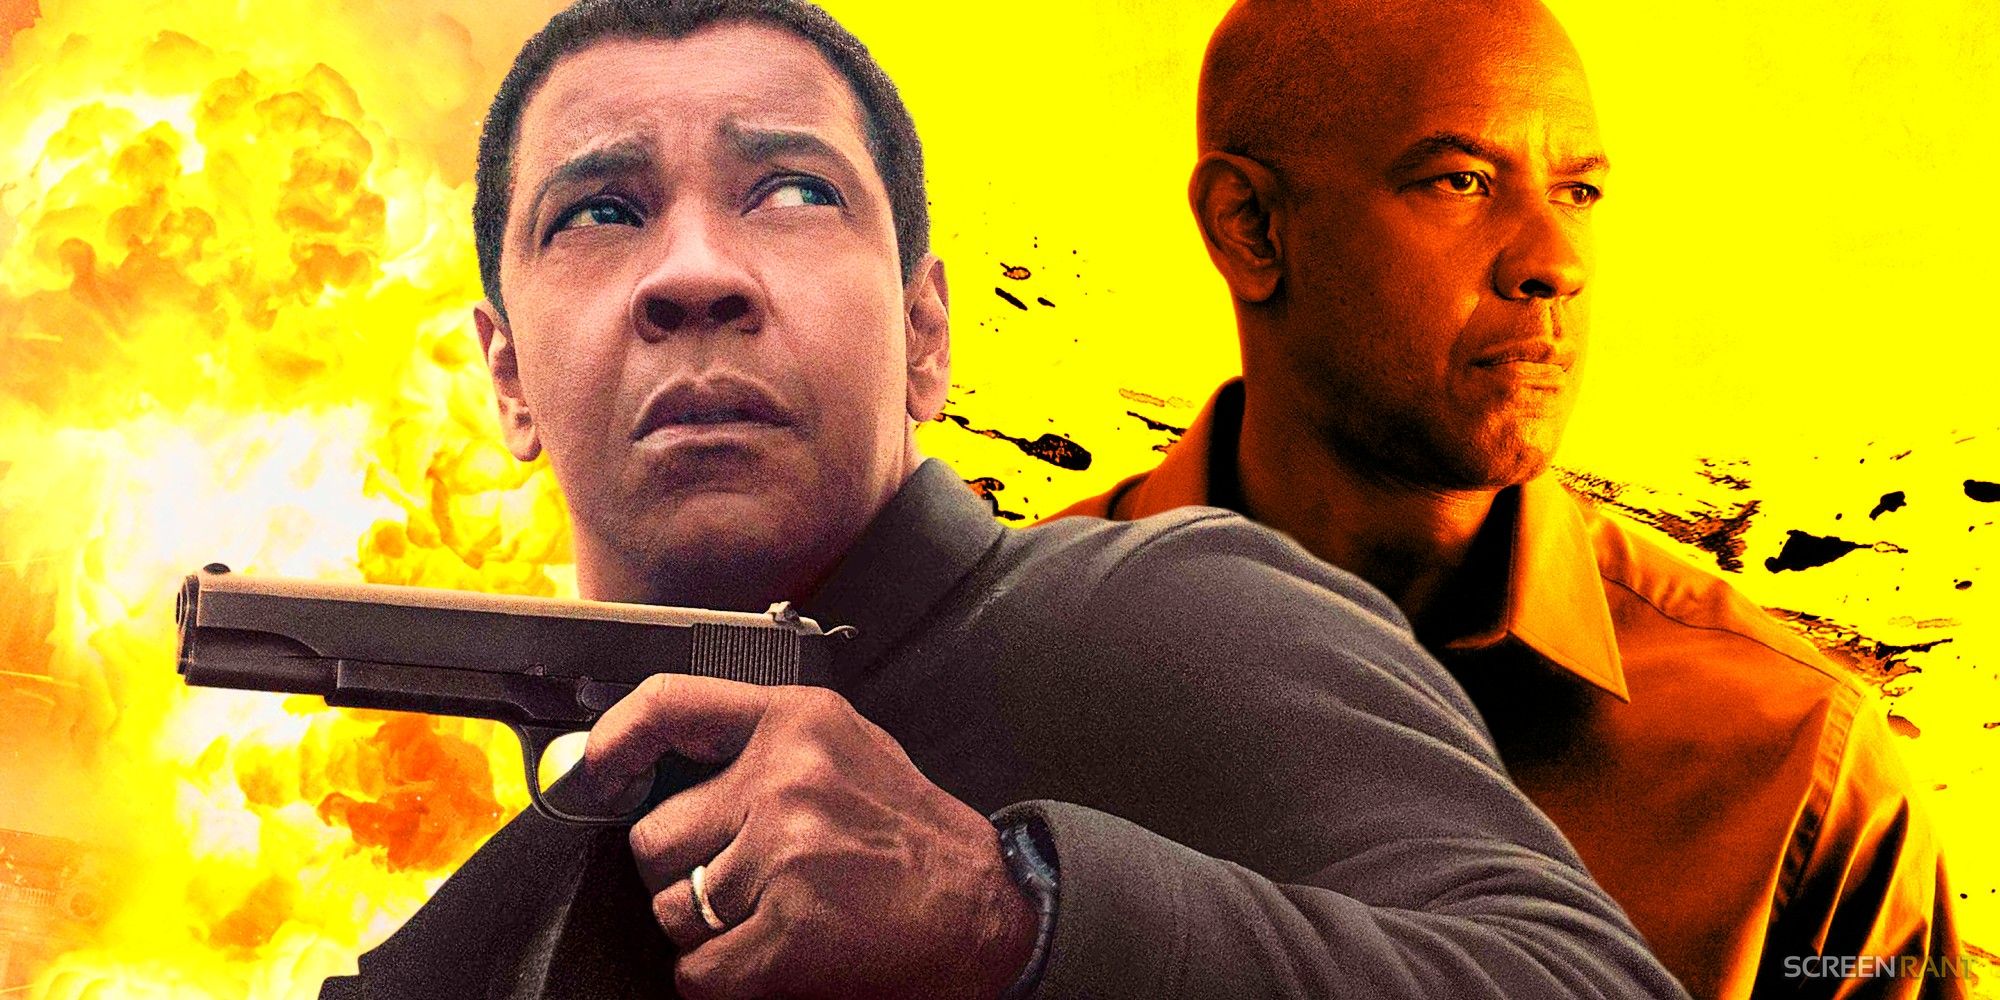 eksekverbar suppe Blind tillid Where To Watch The Equalizer 1 & 2